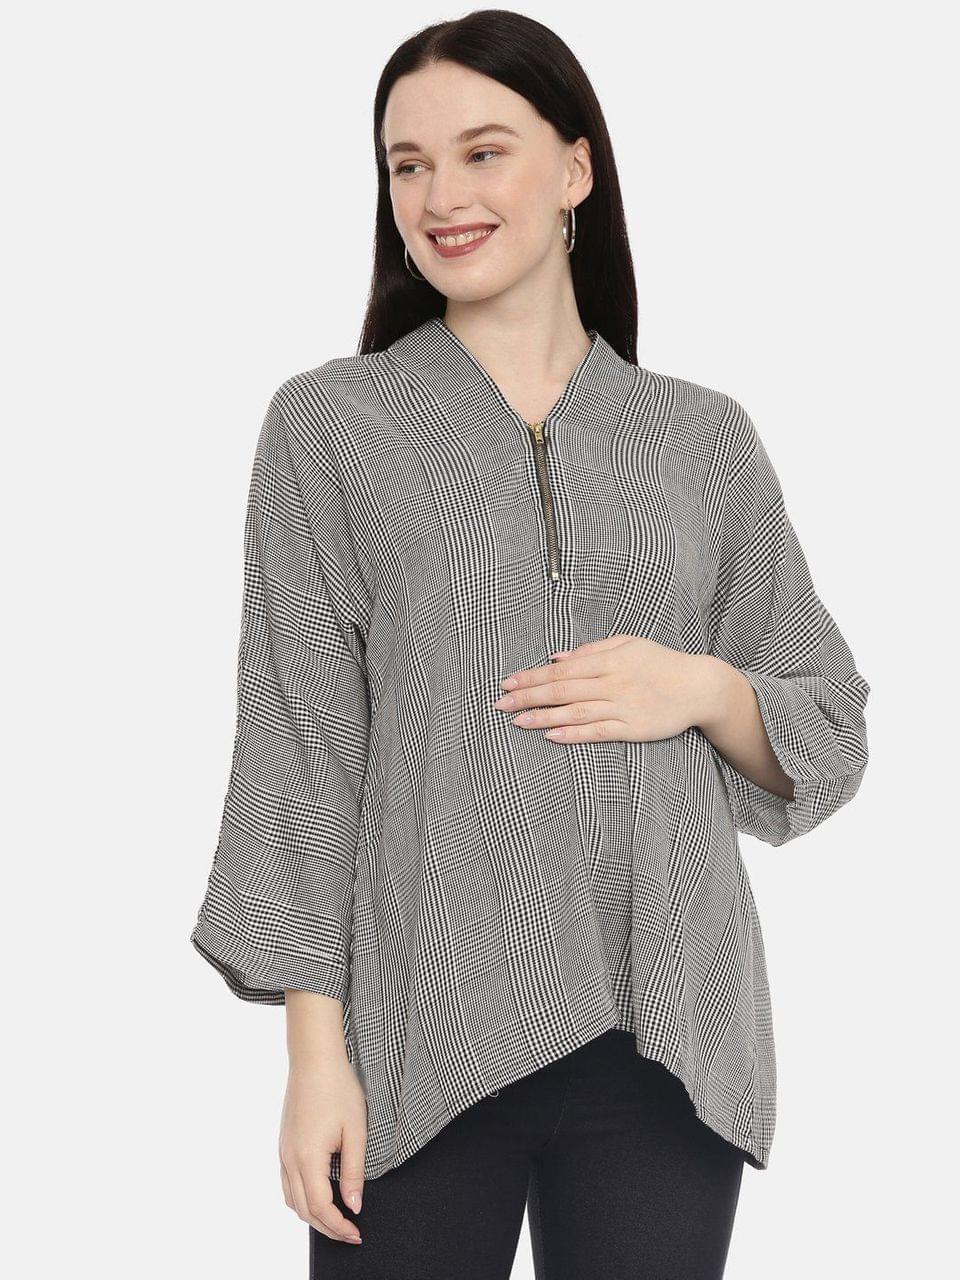 The Mom Store Gingham Style Checks Maternity and Nursing Tunic Top